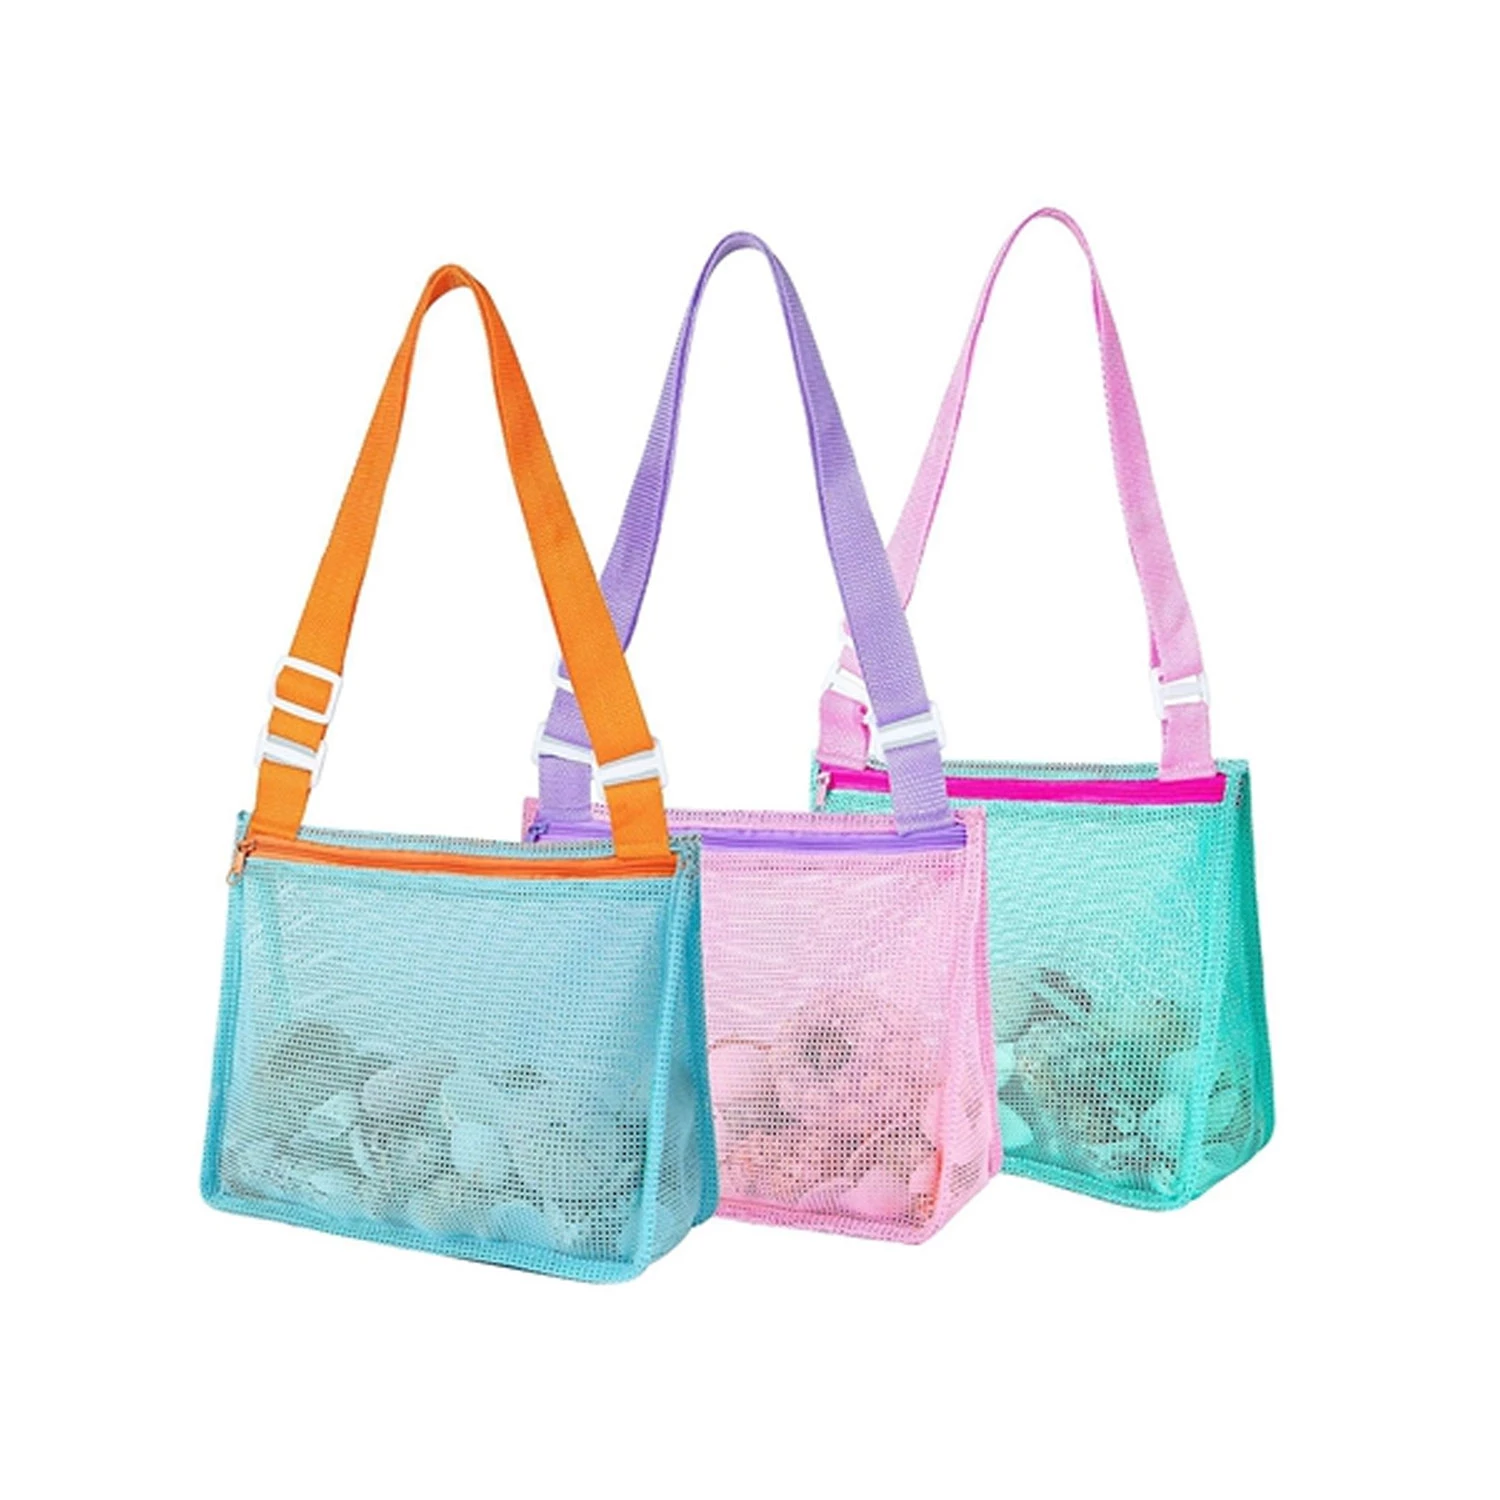 3pcs Beach Mesh Bags Seashell Sand Toys Collecting Tote Bags With Adjustable Straps For Boys Girls